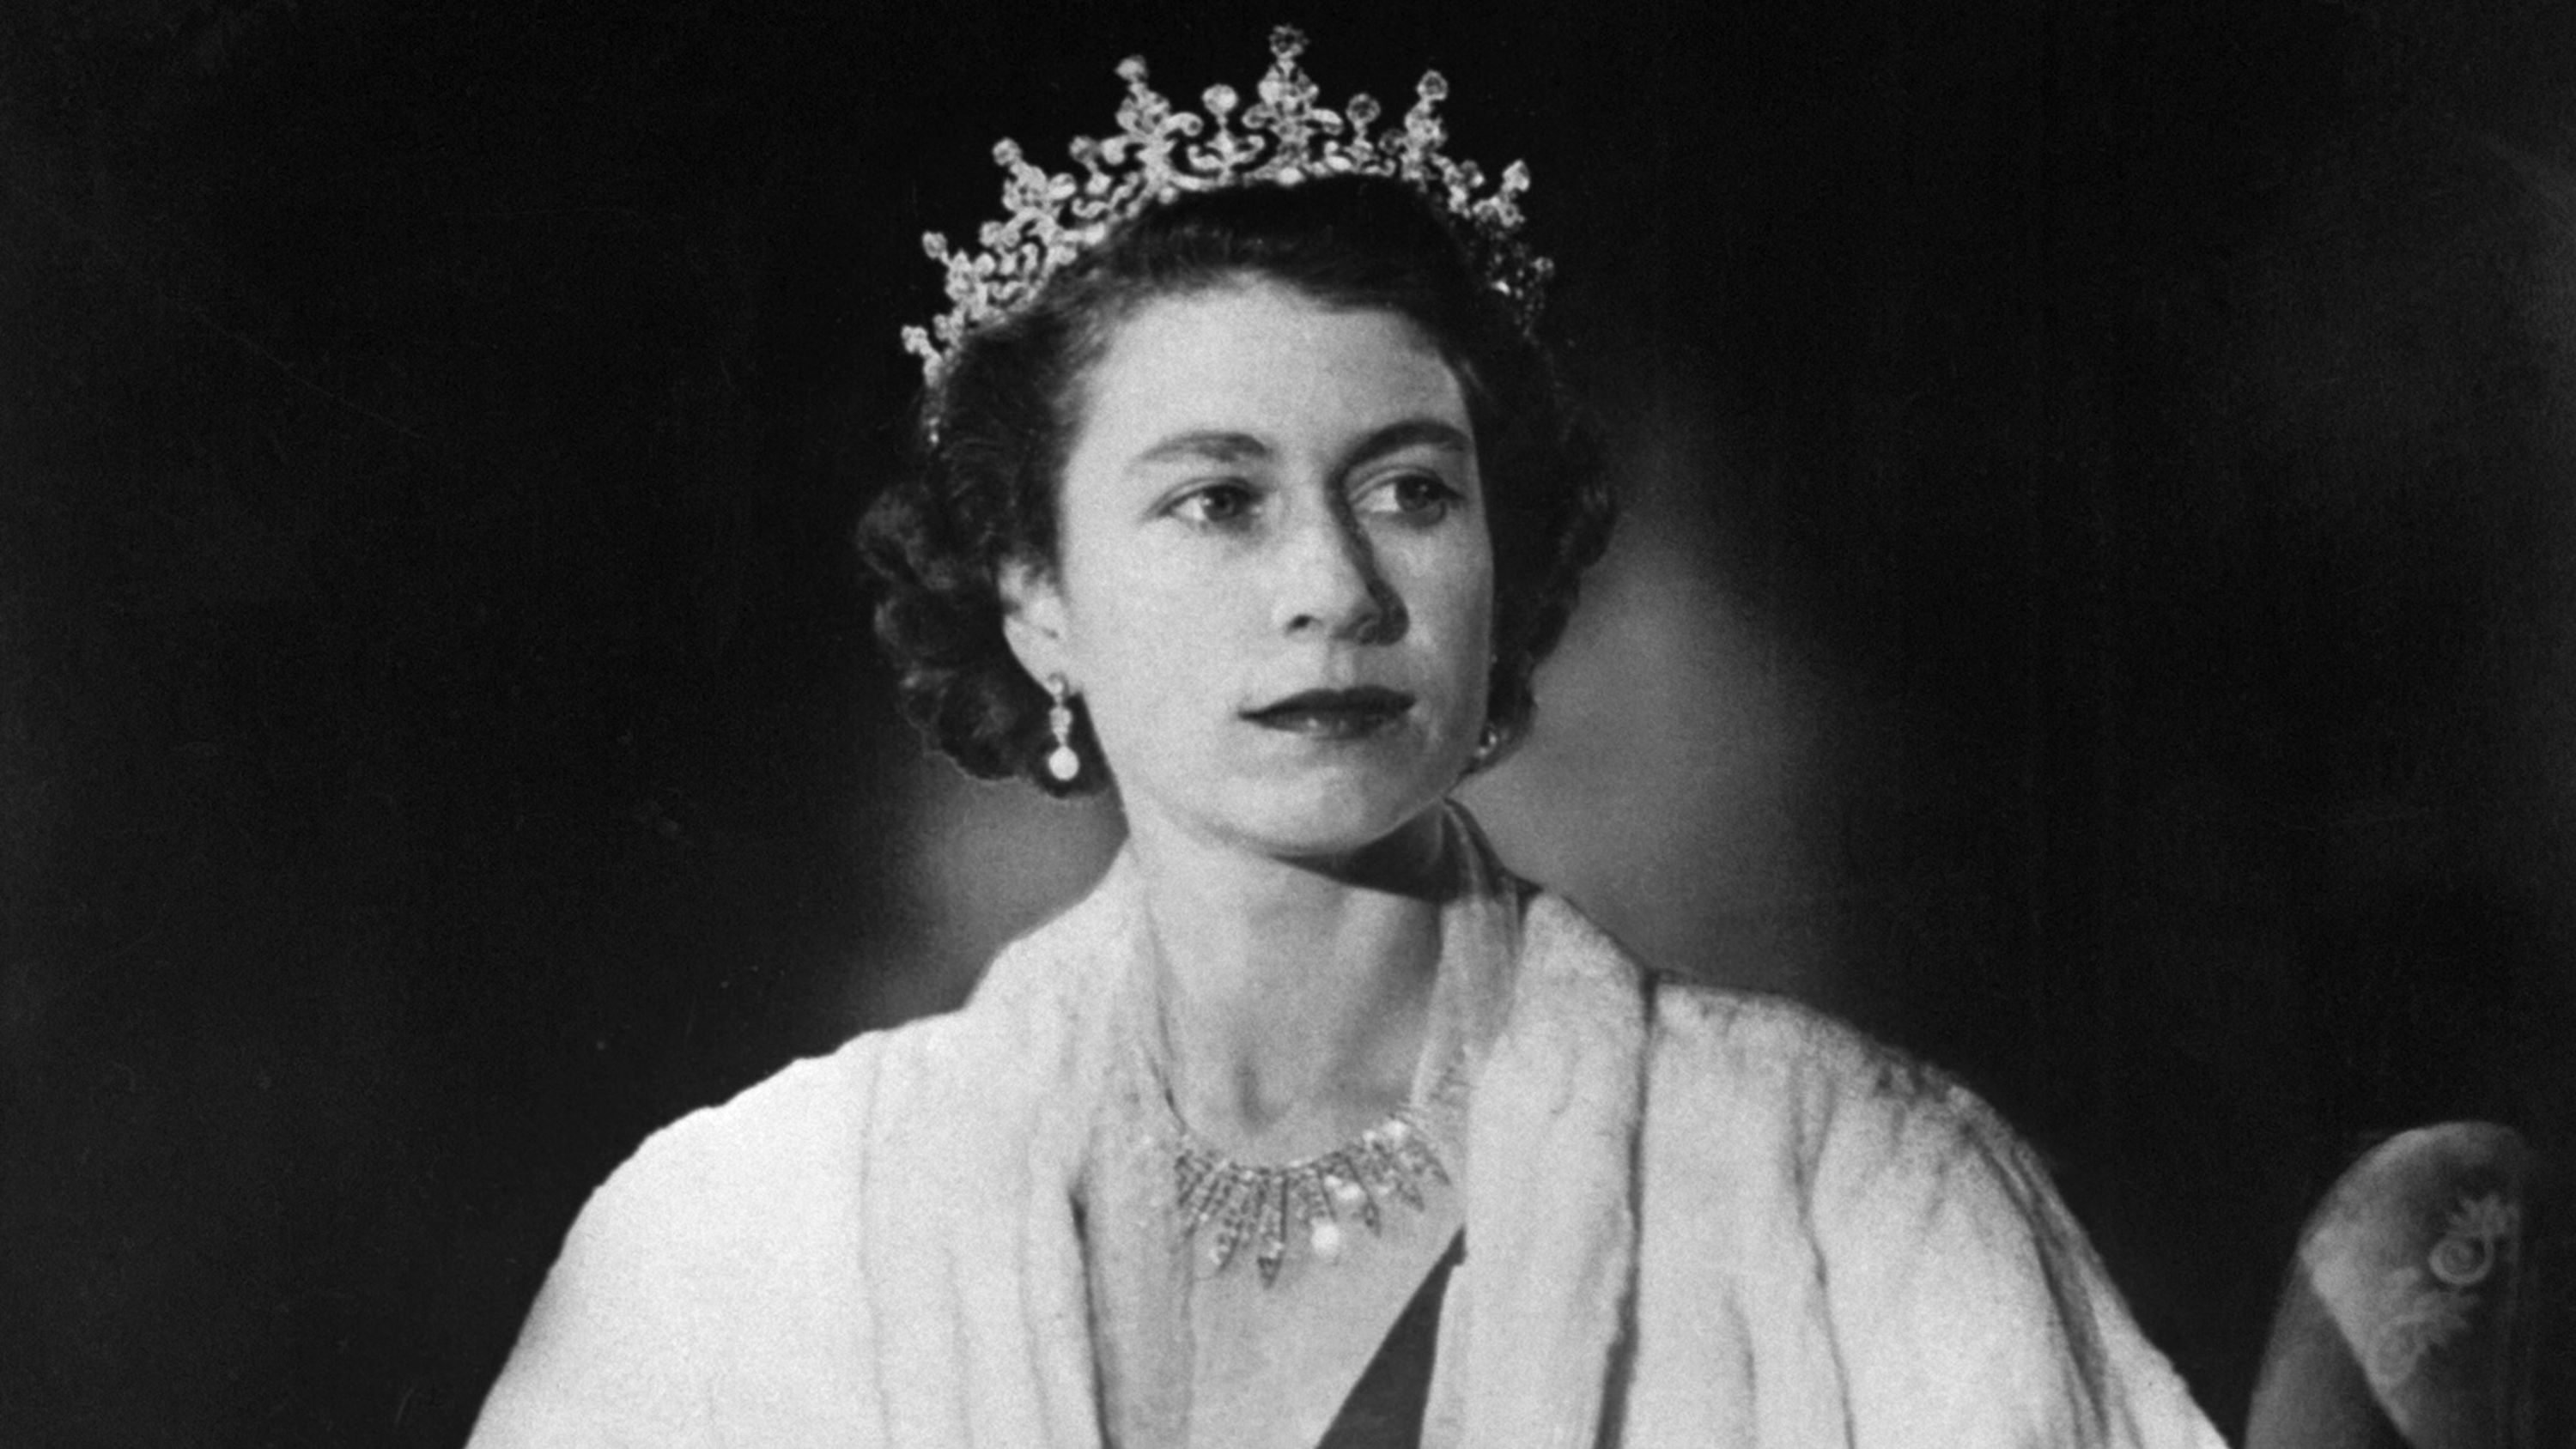 When her father died in 1952, Elizabeth II — then just 25 years old — became the Queen of England.